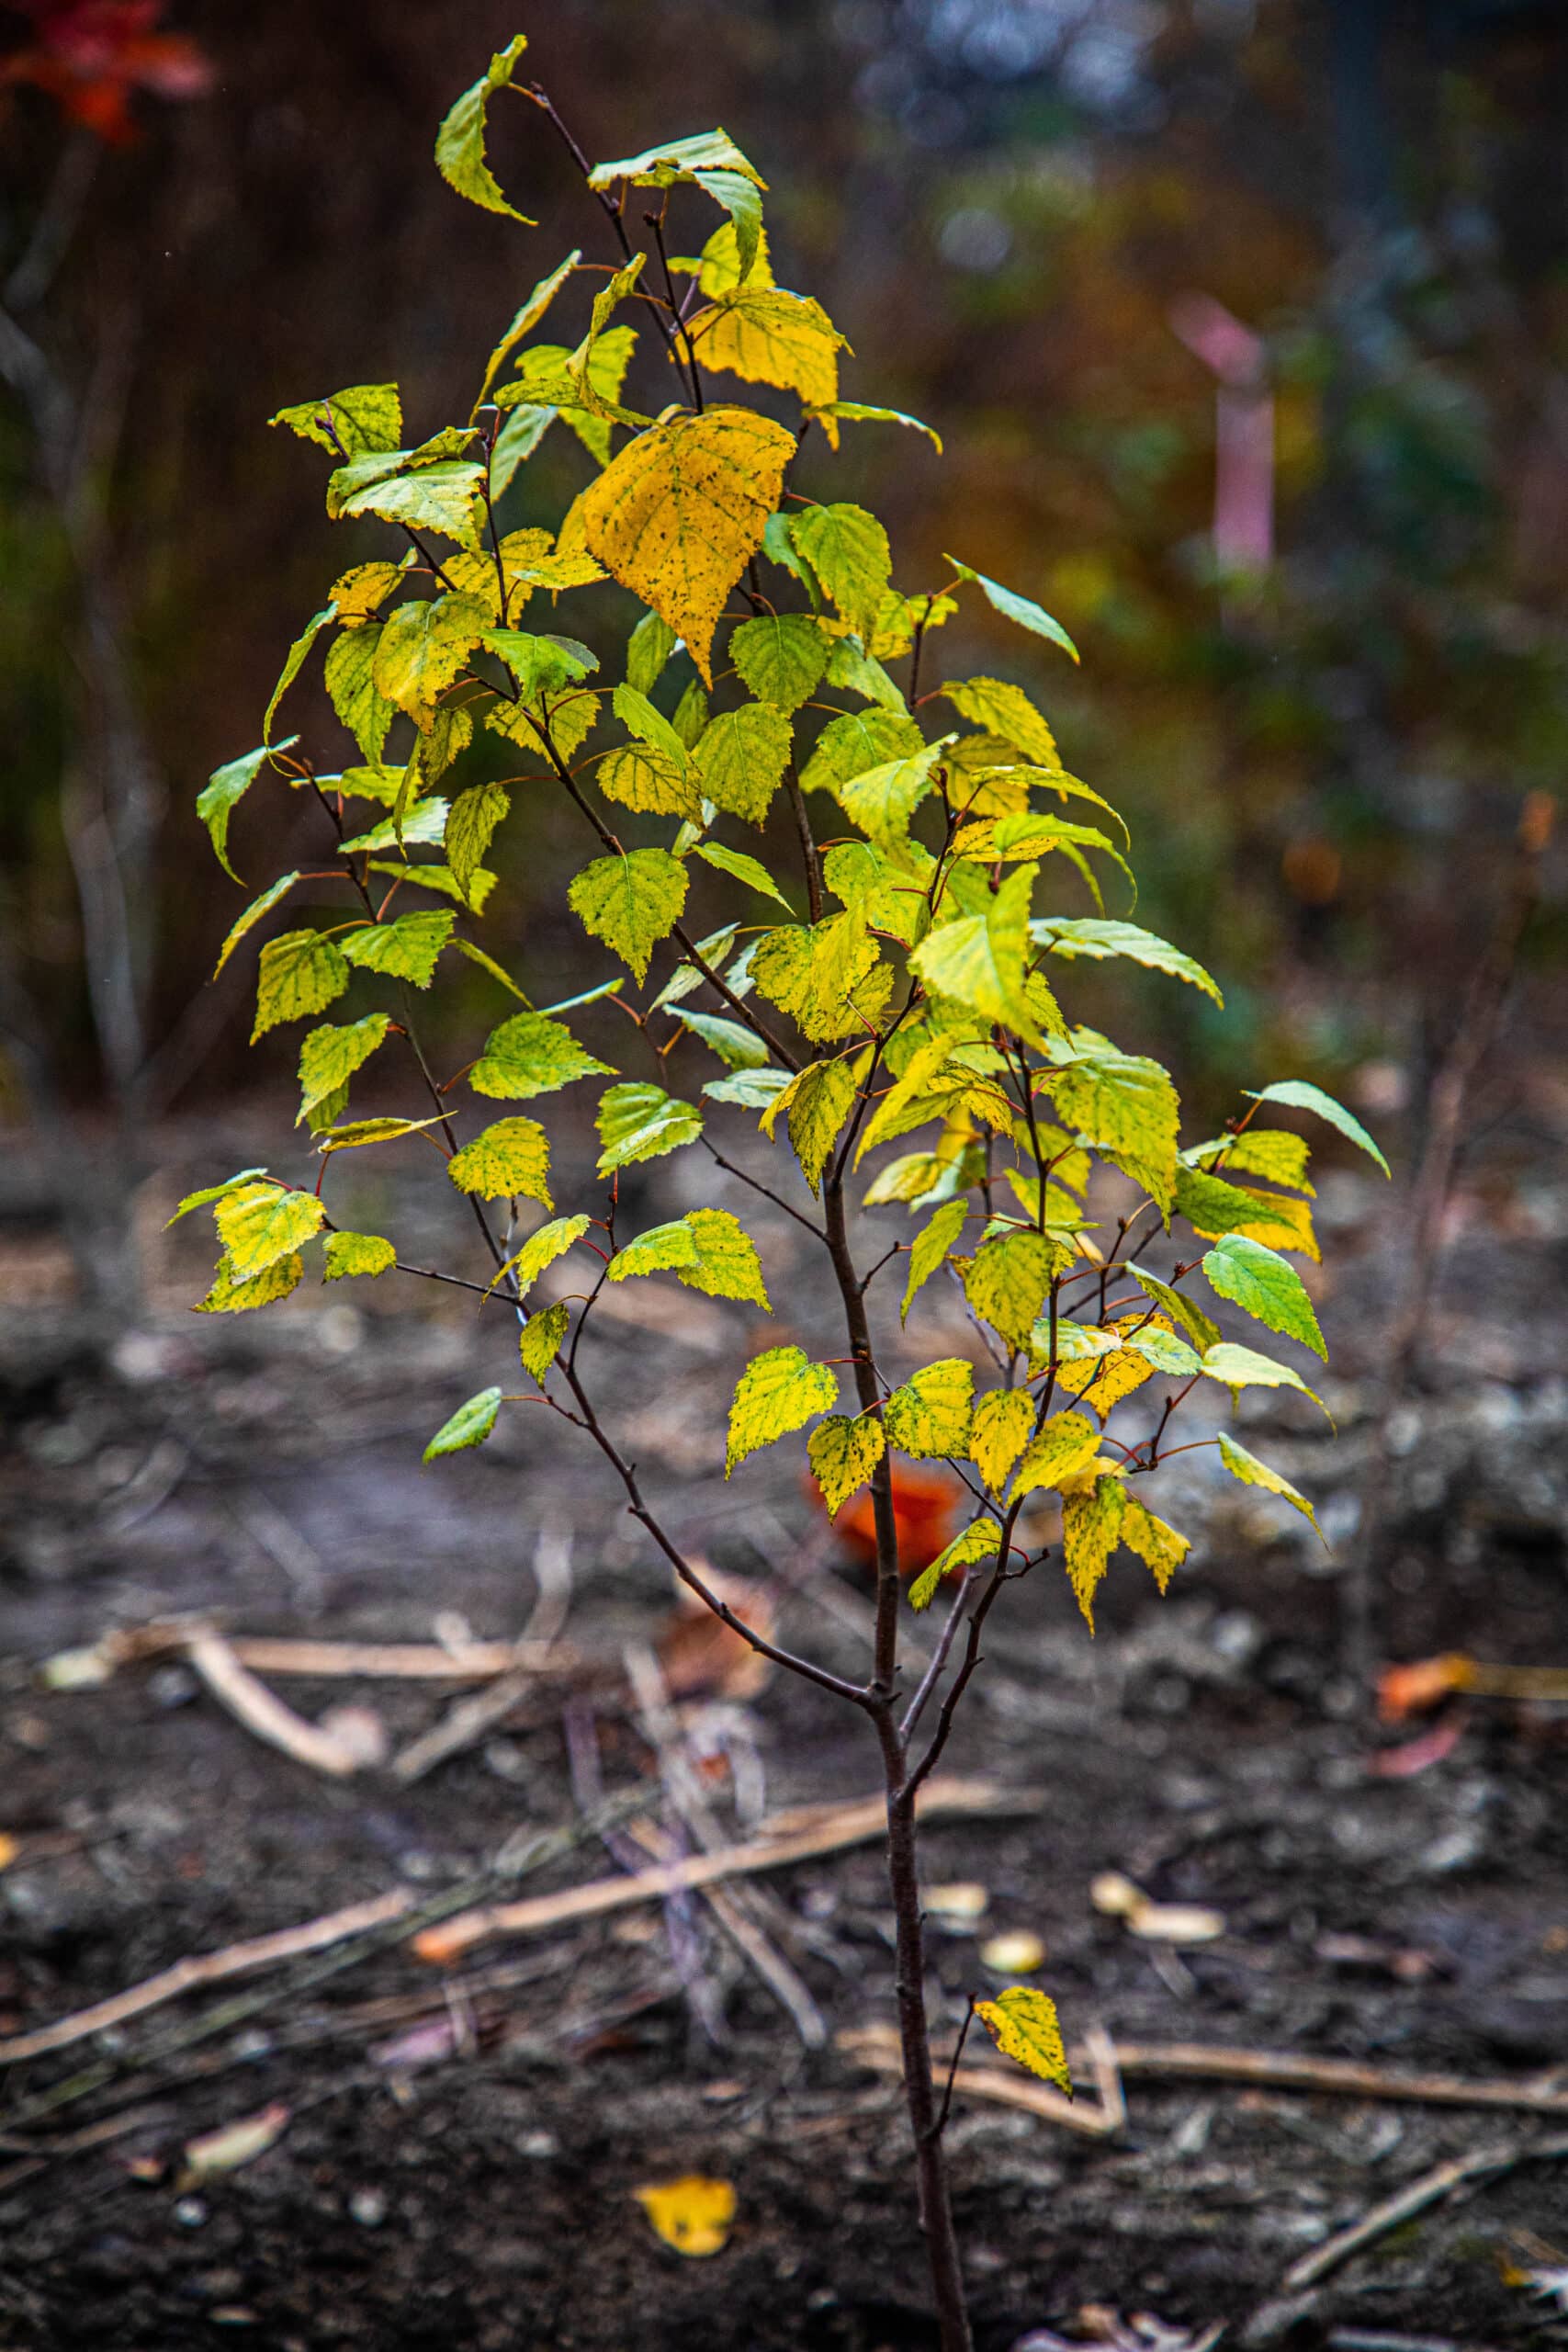 A small freshly planted sapling with yellow leaves